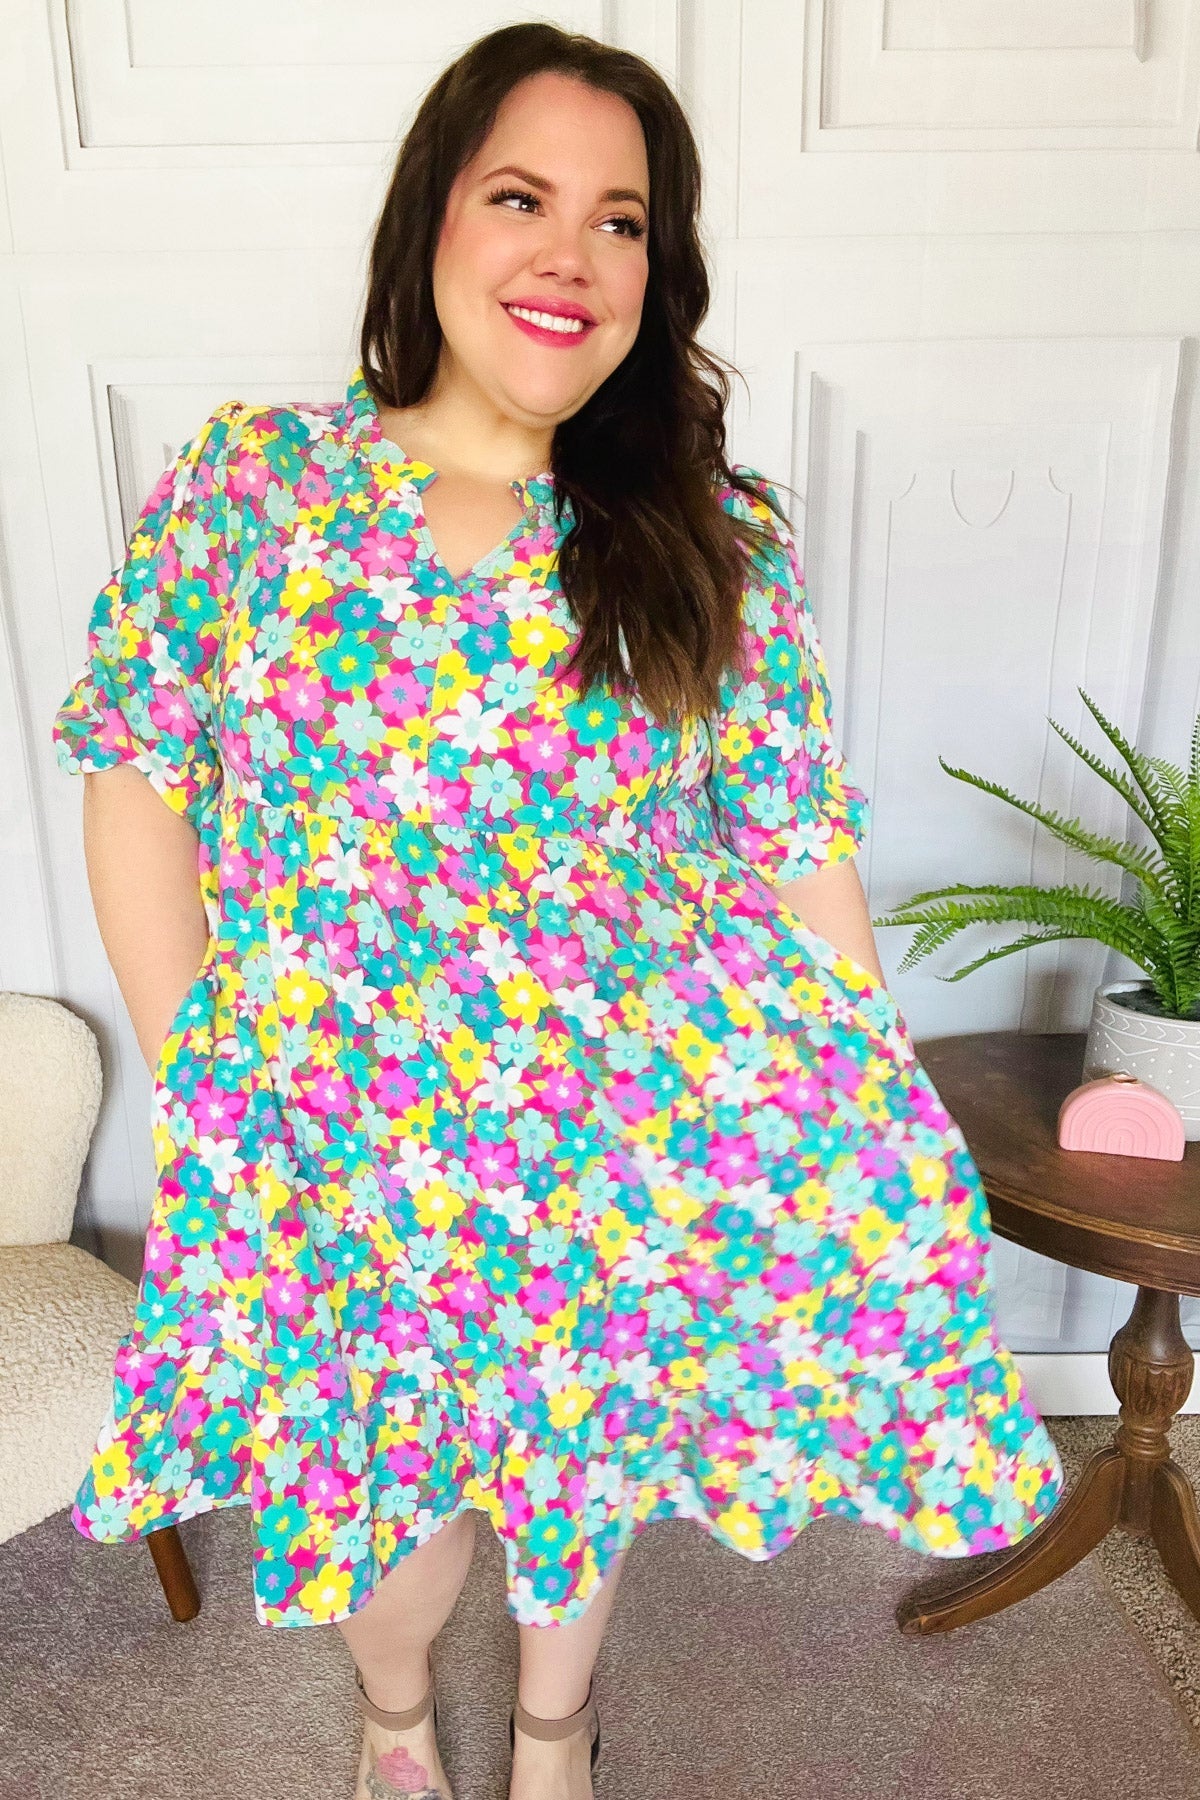 Can't Say No Floral Bubble Sleeve Dress